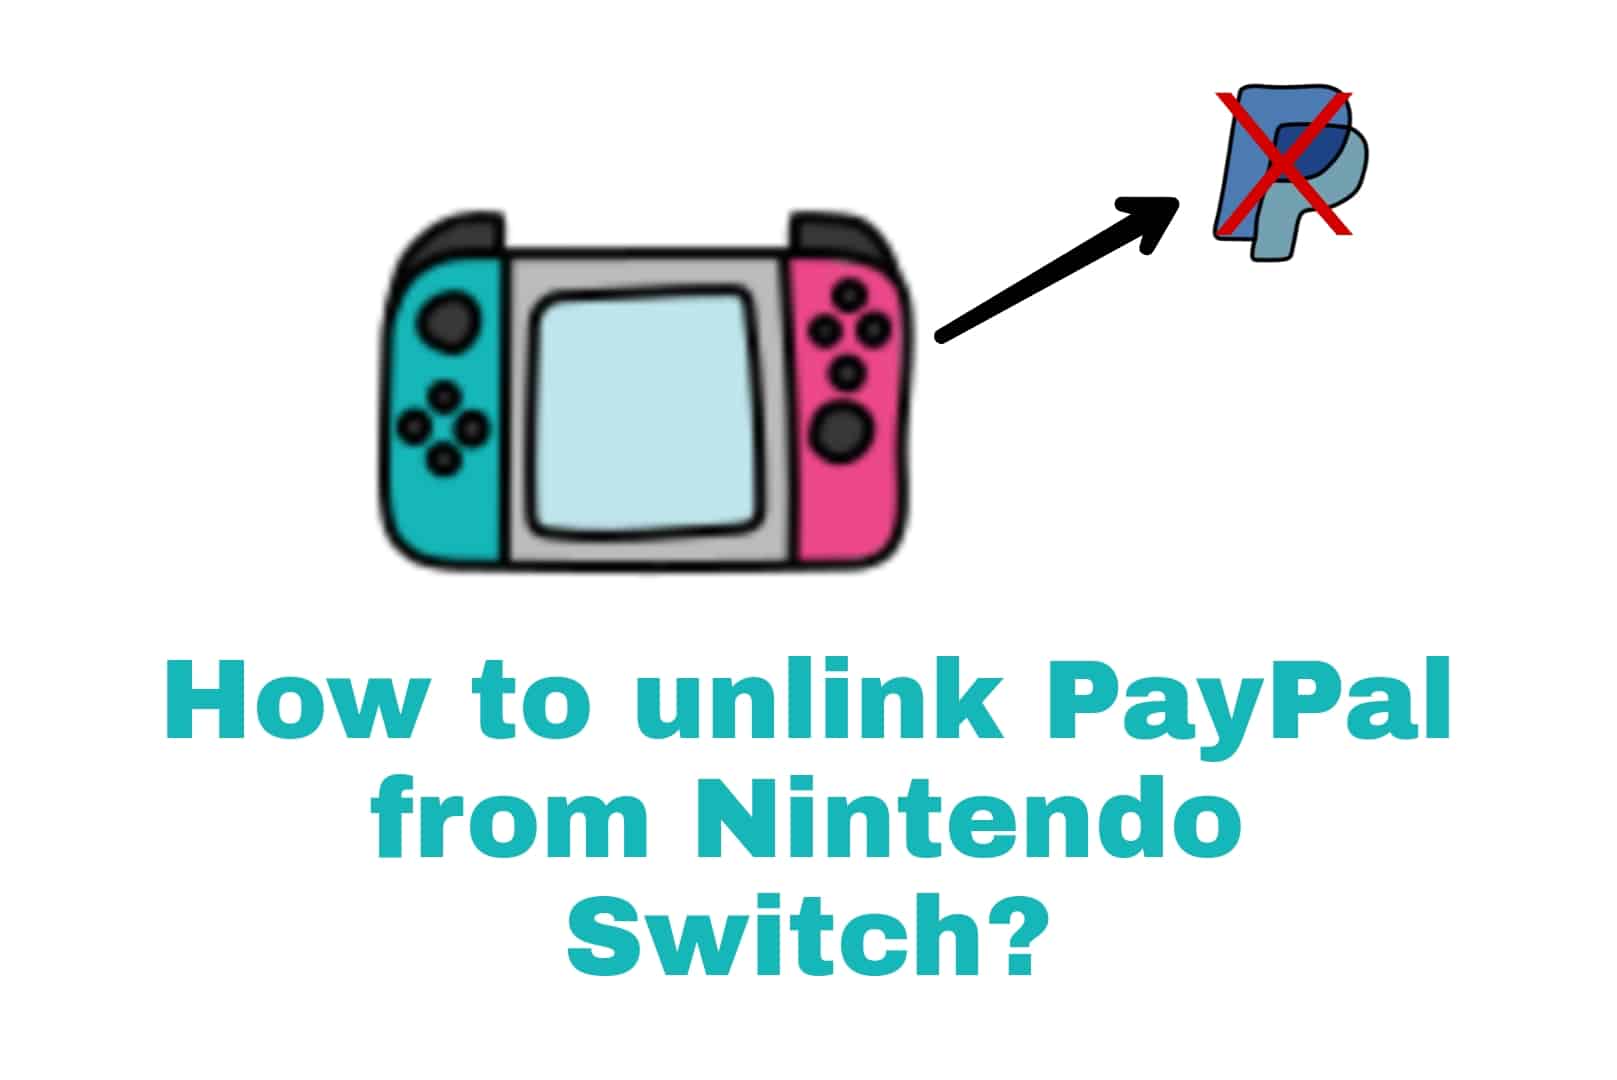 How to unlink PayPal from Nintendo Switch?